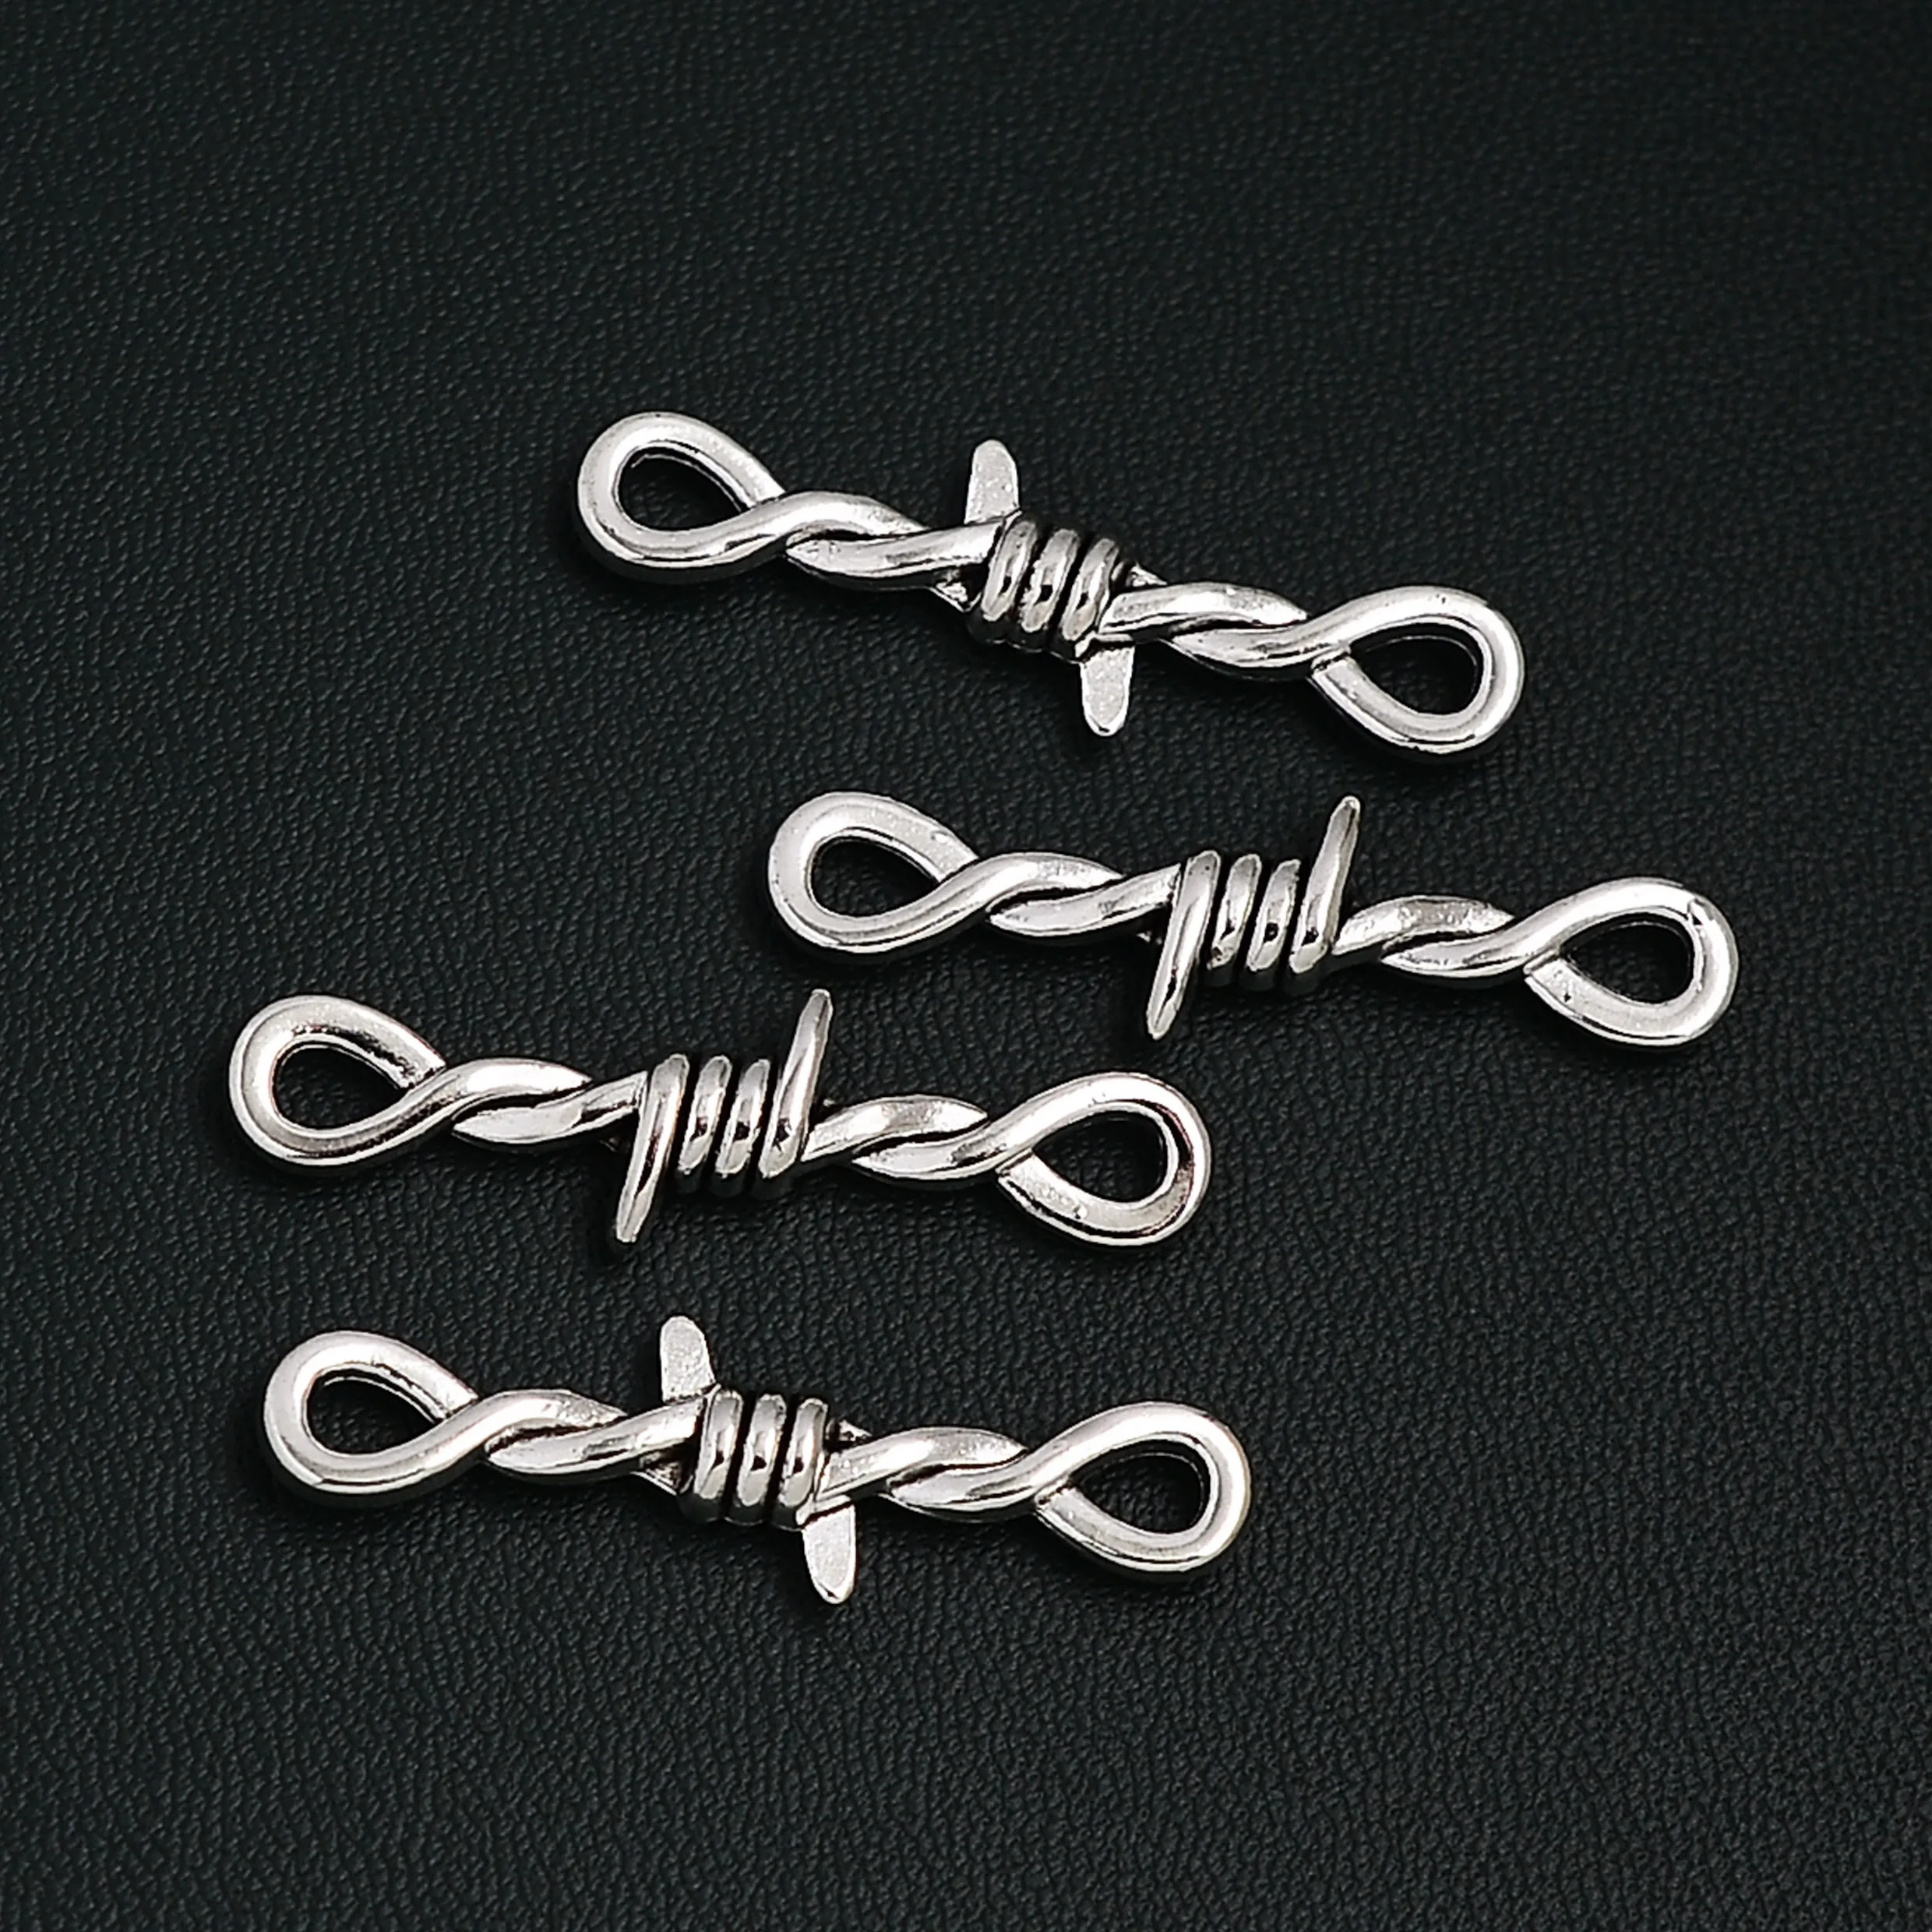 

10pcs/Lots 9x34mm Antique Silver Plated Thorns Link Bramble Charms Connector Pendants For Jewlery Making Bracelets Accessories